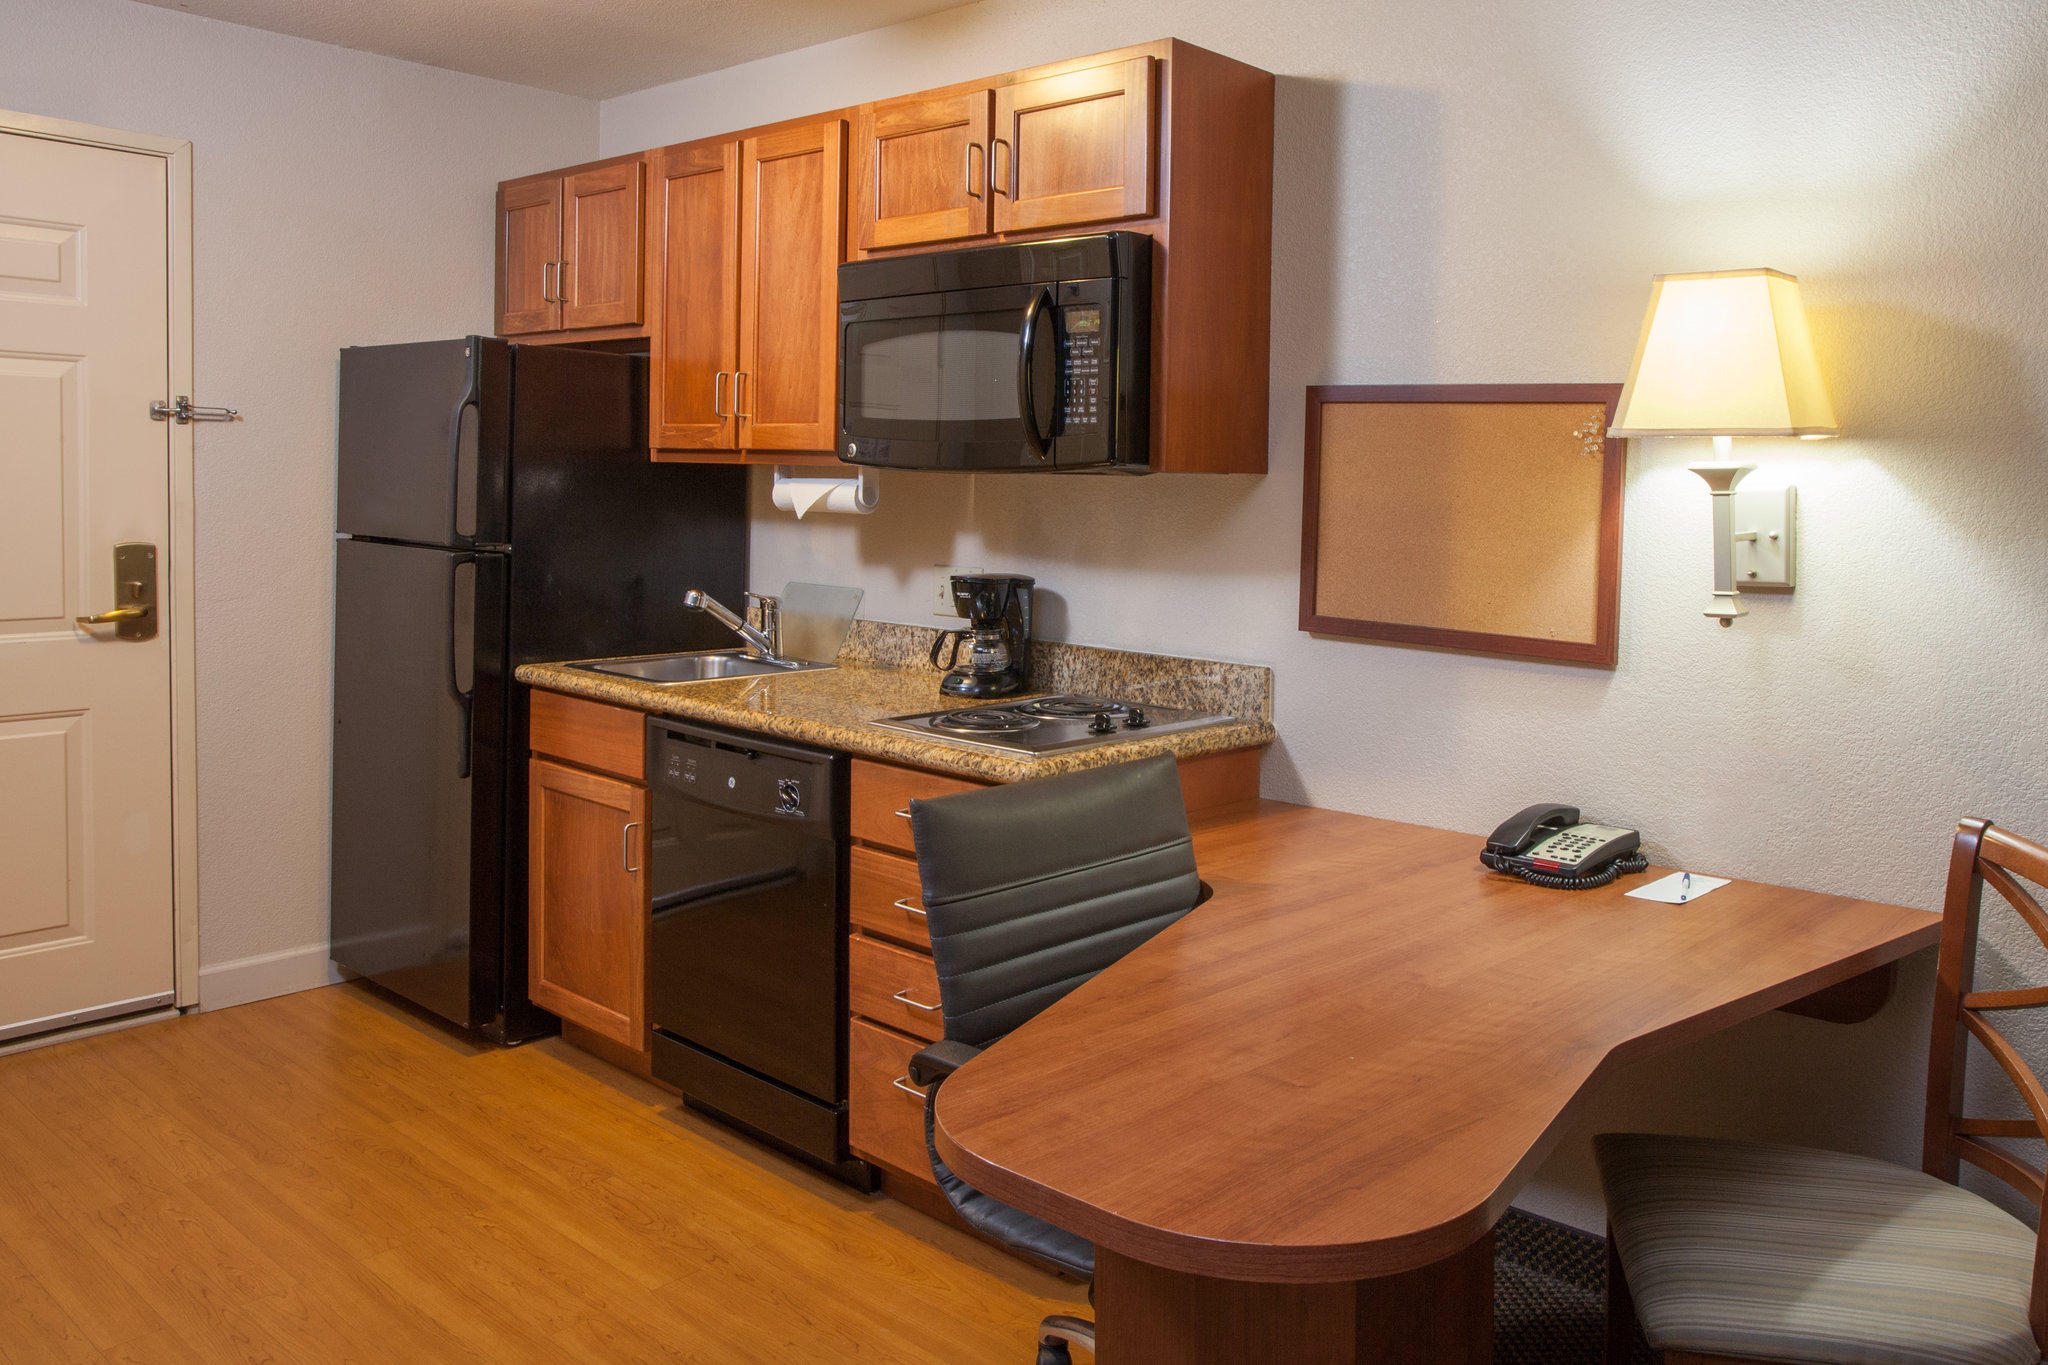 Candlewood Suites Merrillville Photo